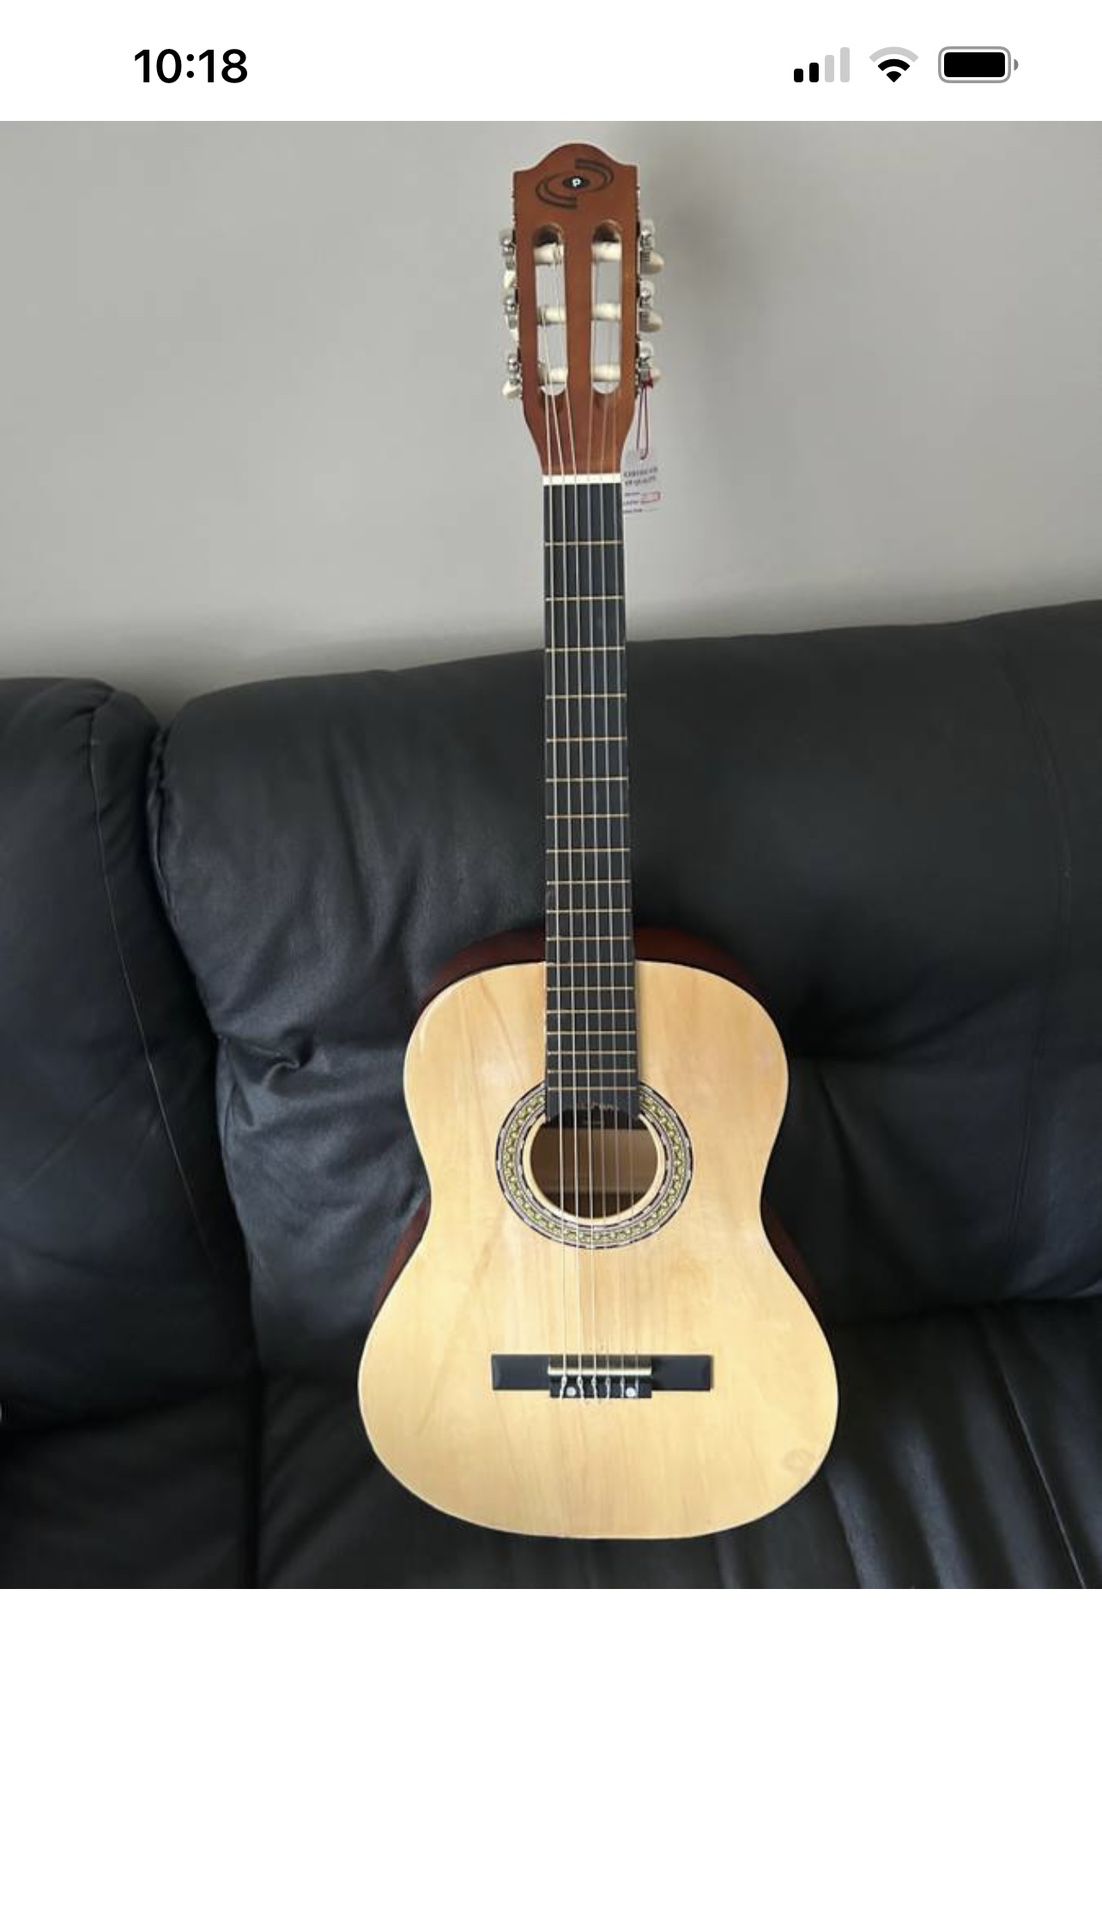 New Pyle Classical Acoustic Guitar 36”, Junior Size (Fort Totten/Petworth Area)